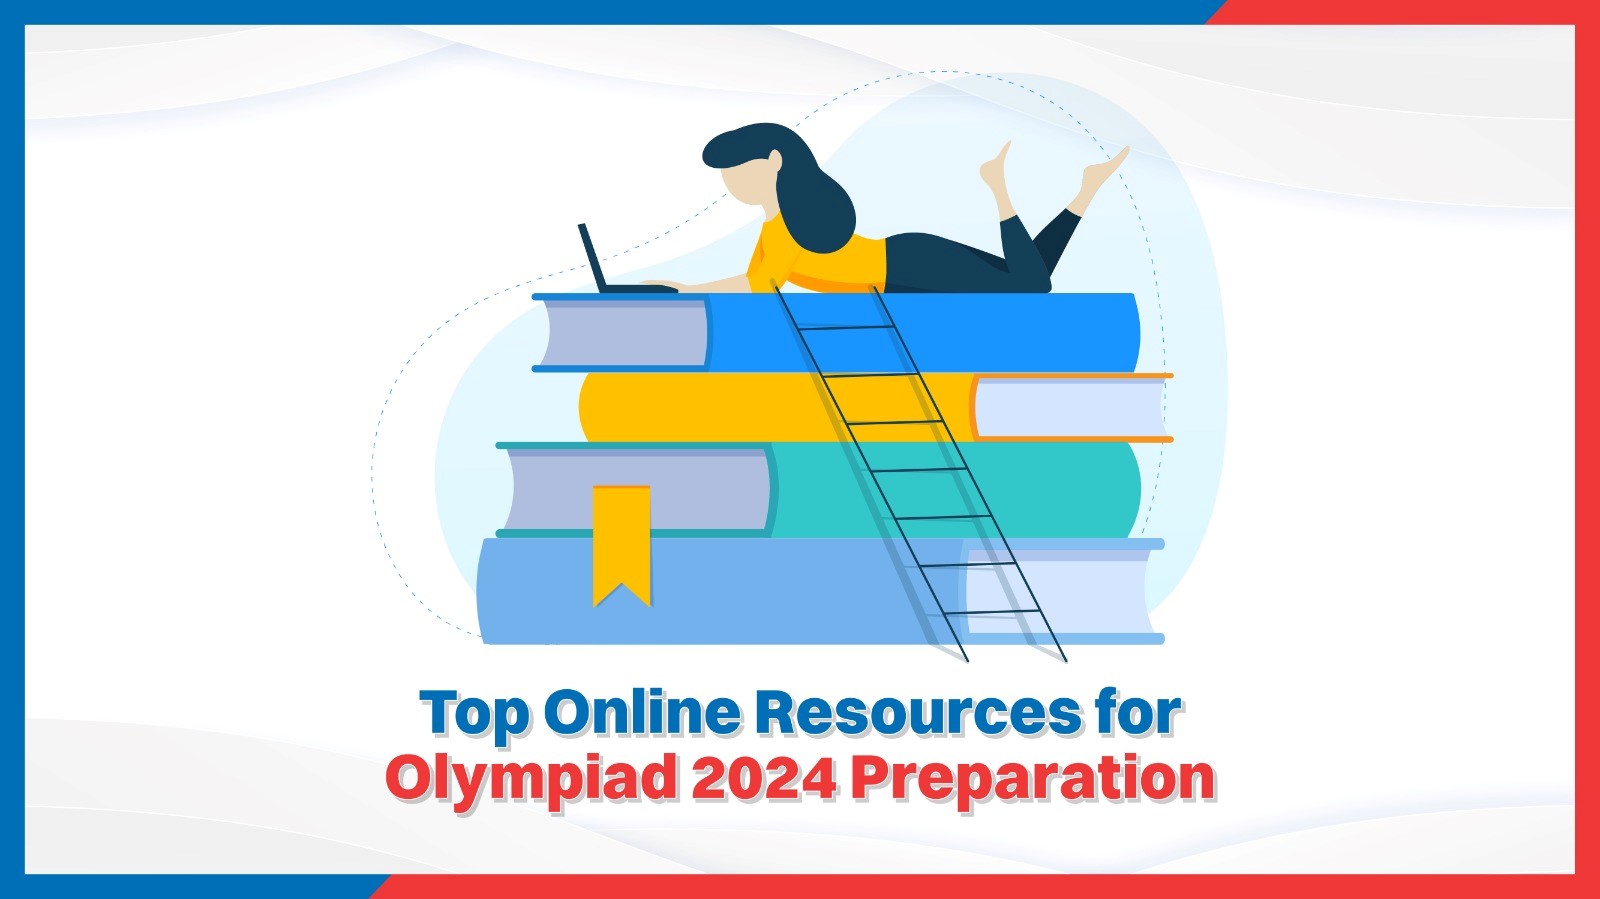 Top Online Resources for Olympiad 2024 Preparation